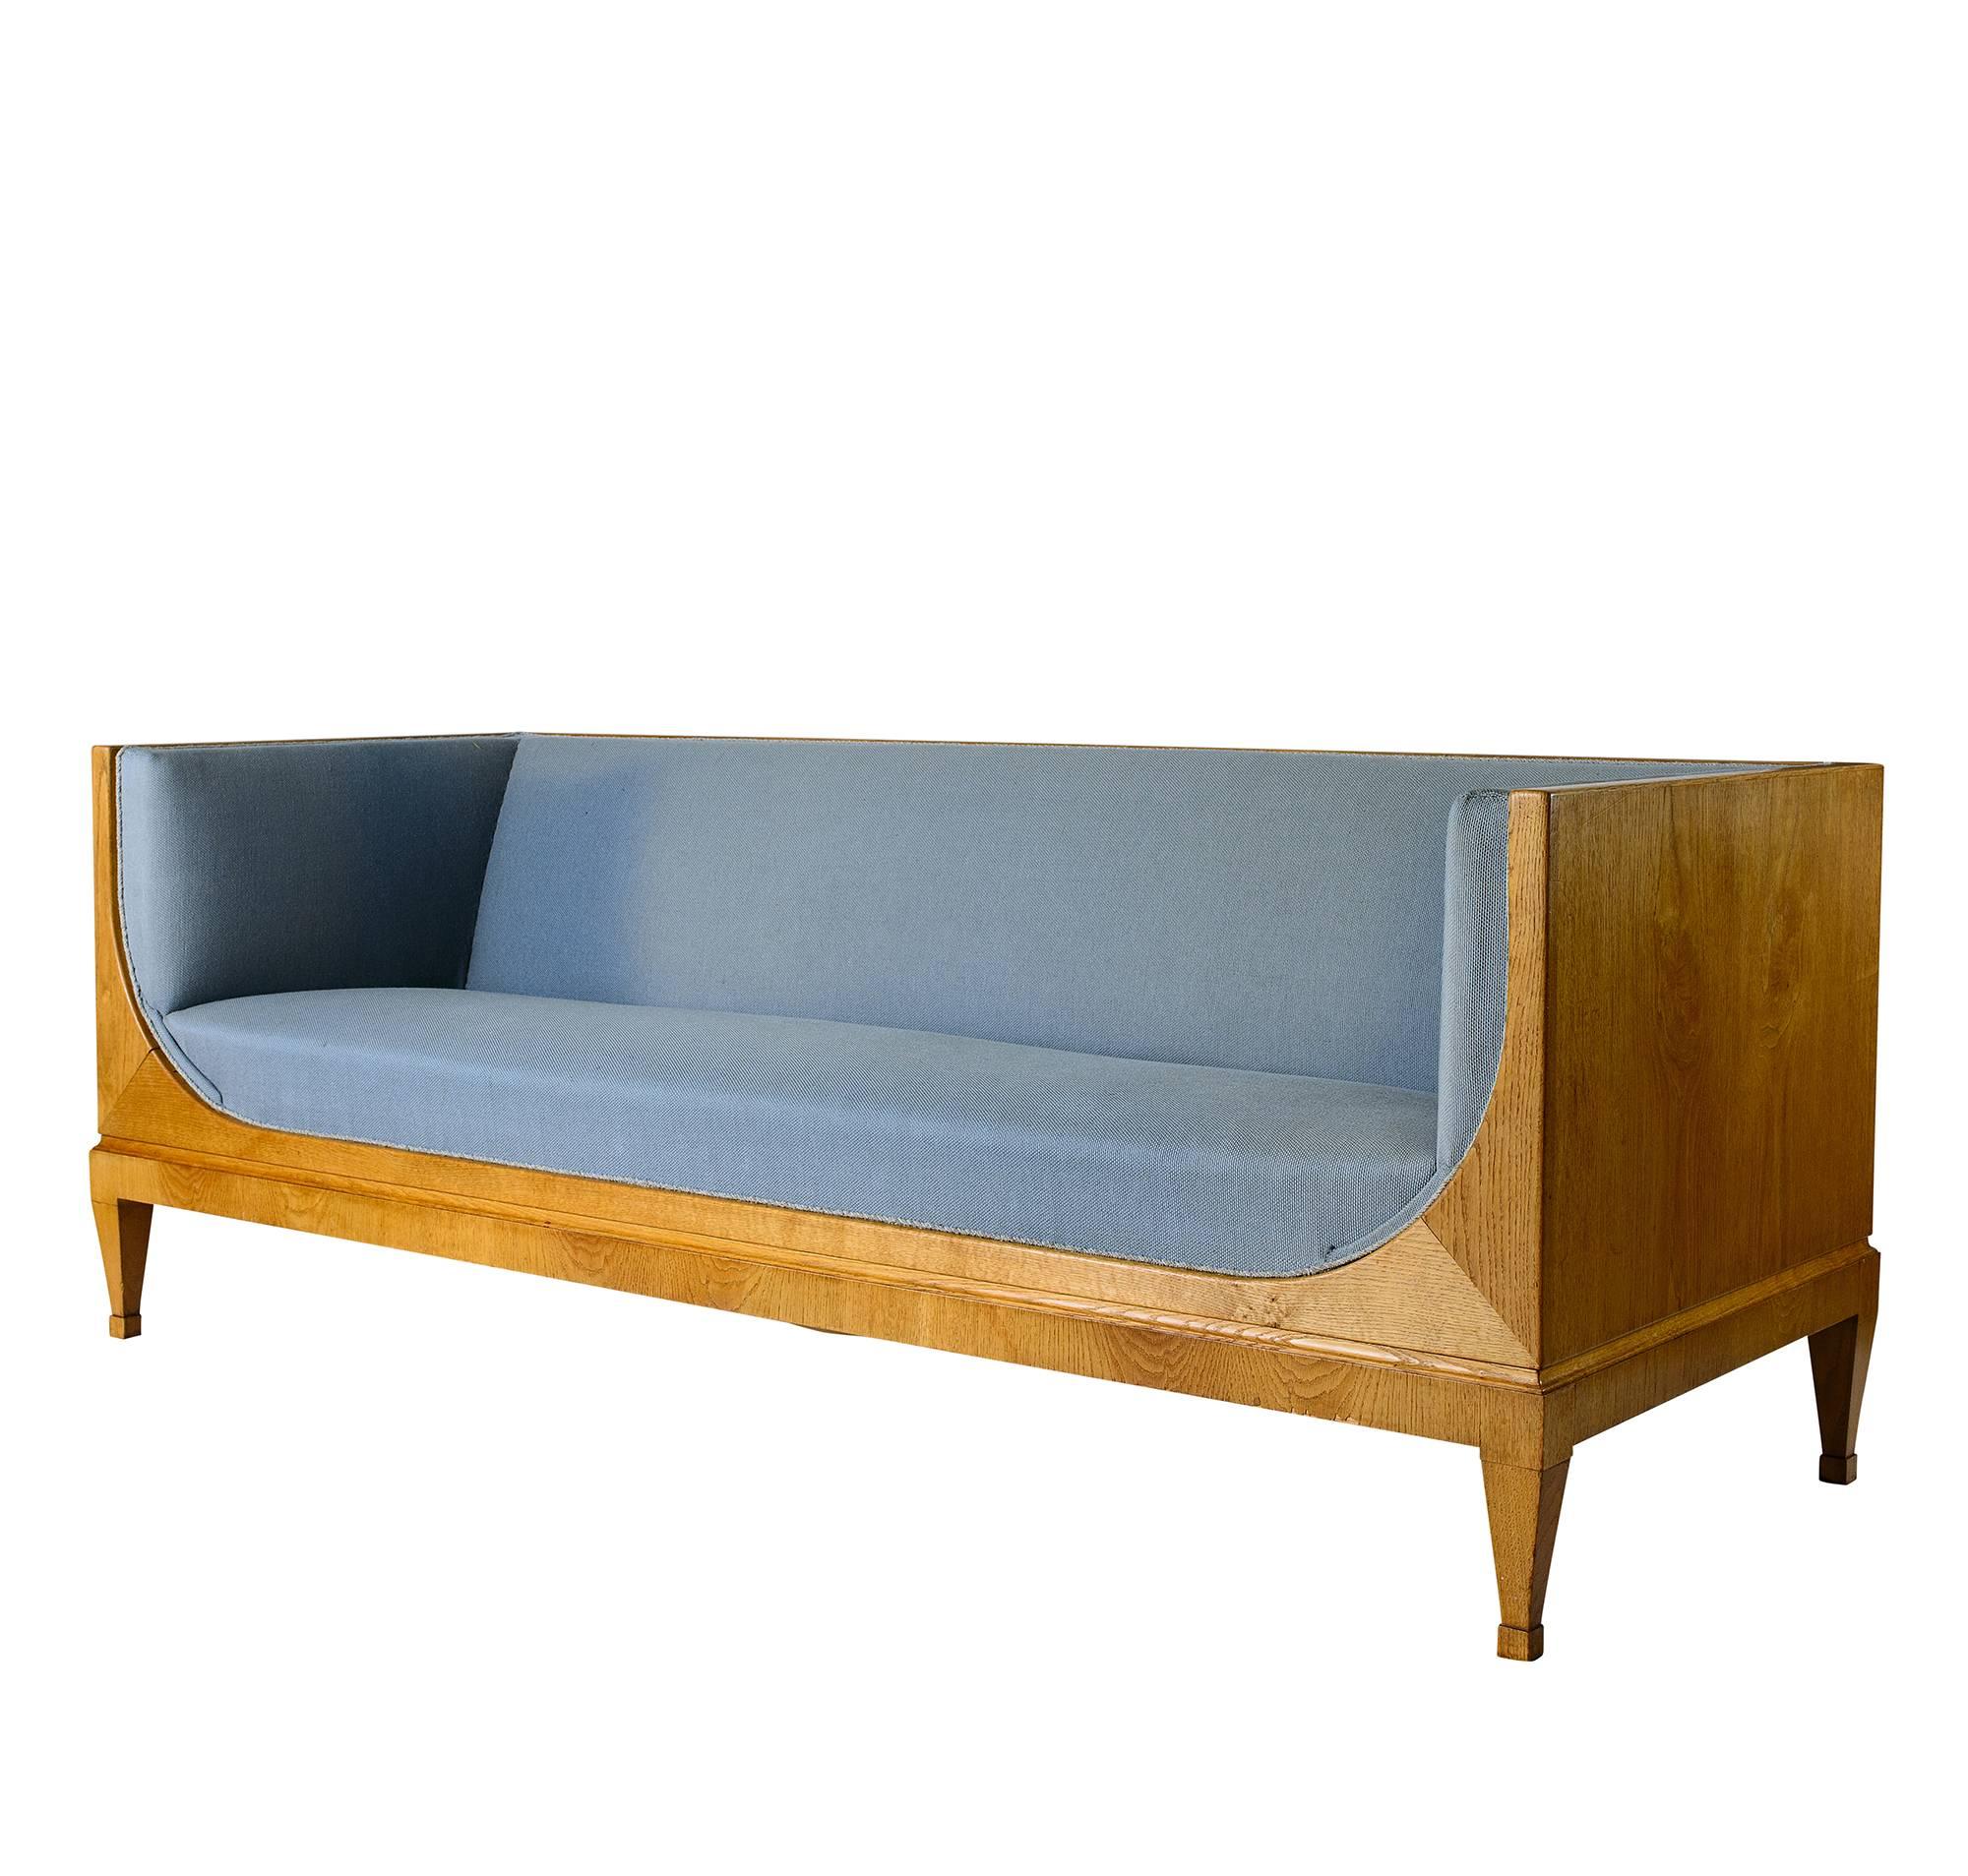 Frits Henningsen sofa. This is the first time I have seen one of these sofas with
an original finished back.